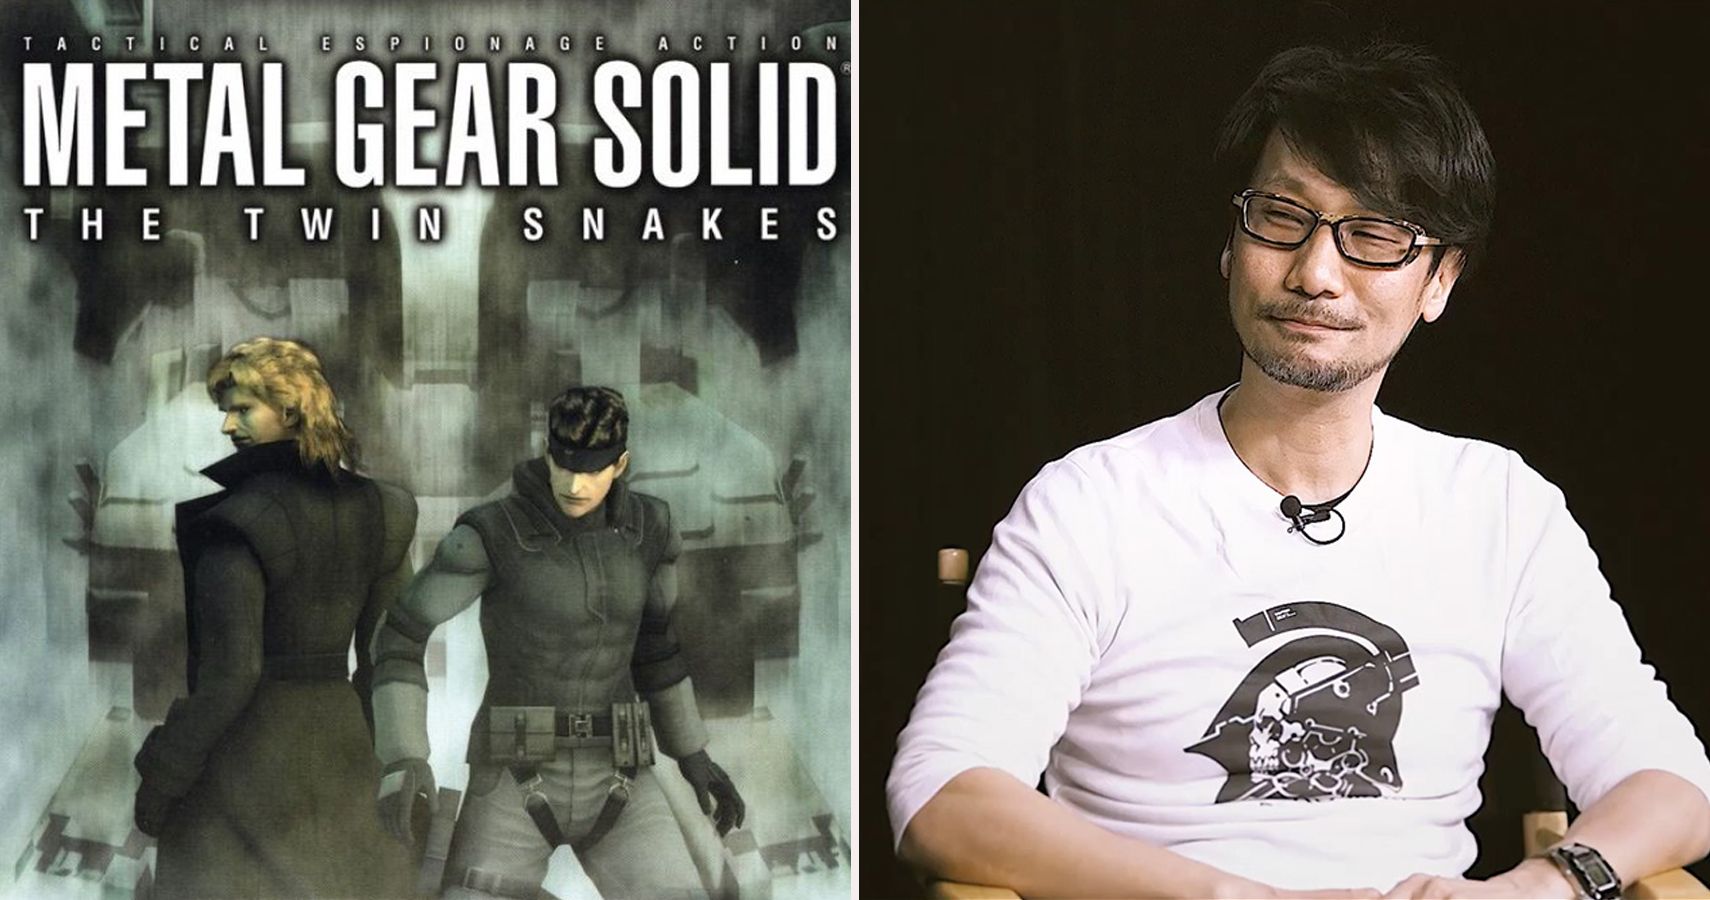 15 Horrible Remakes That Actually Made Games Worse